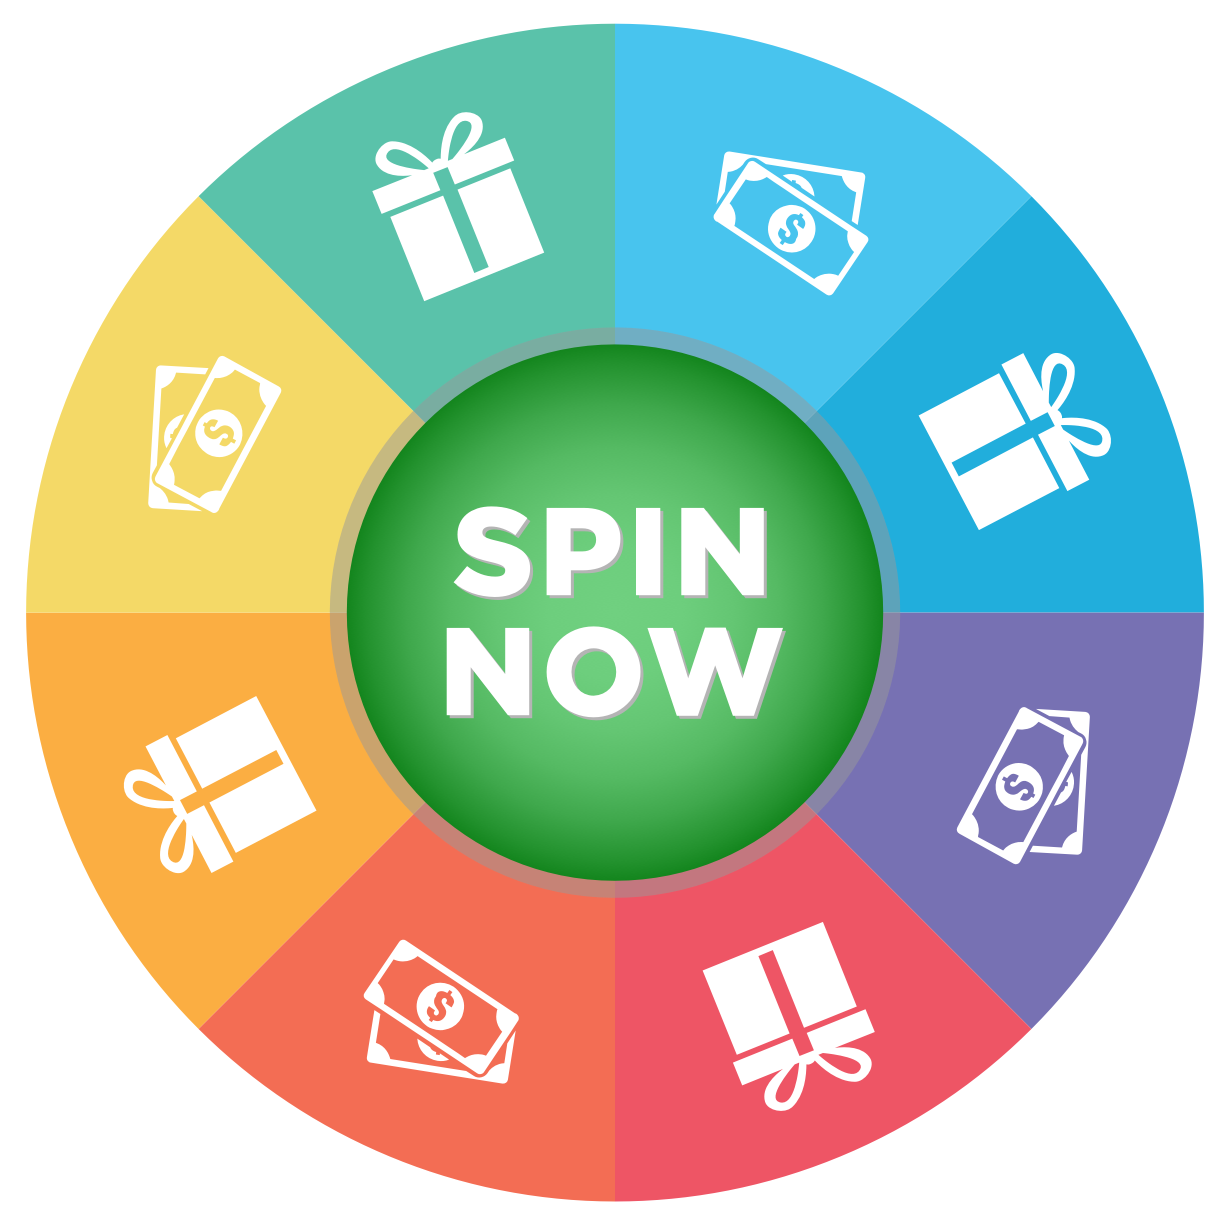 Spin download. Spin. Spin to win. Спина вектор. Спин продажи.